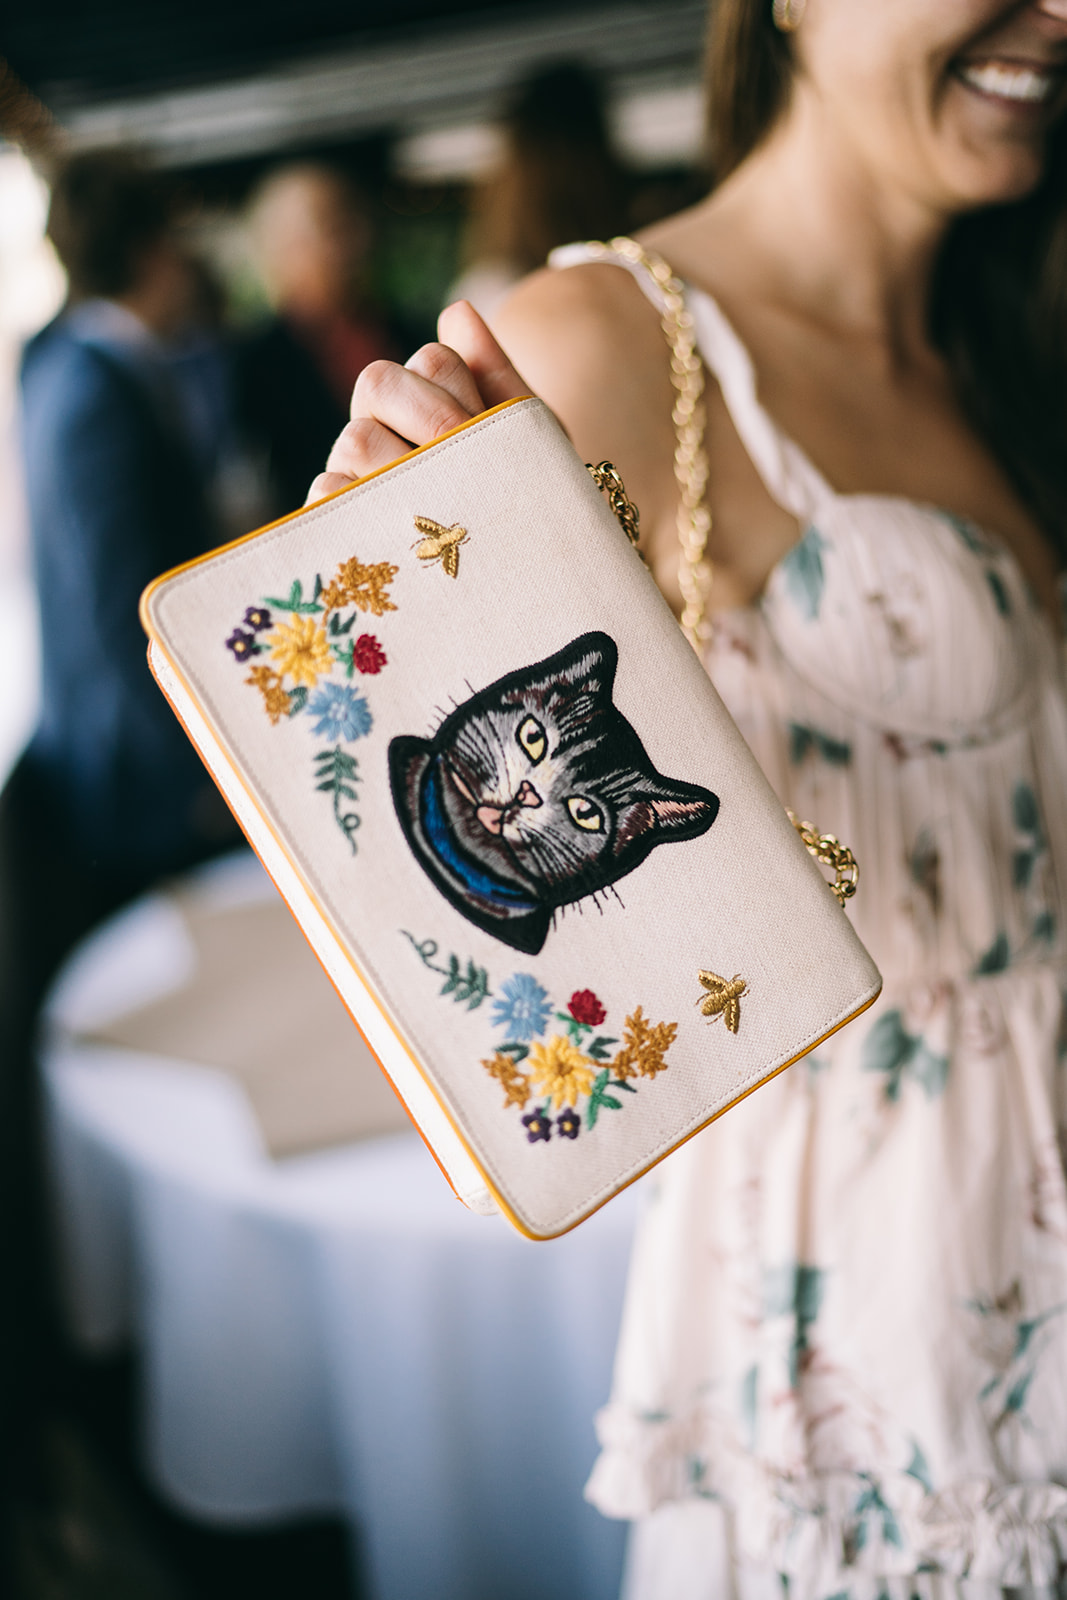 Women showing the front of her purse which has a cat on it 